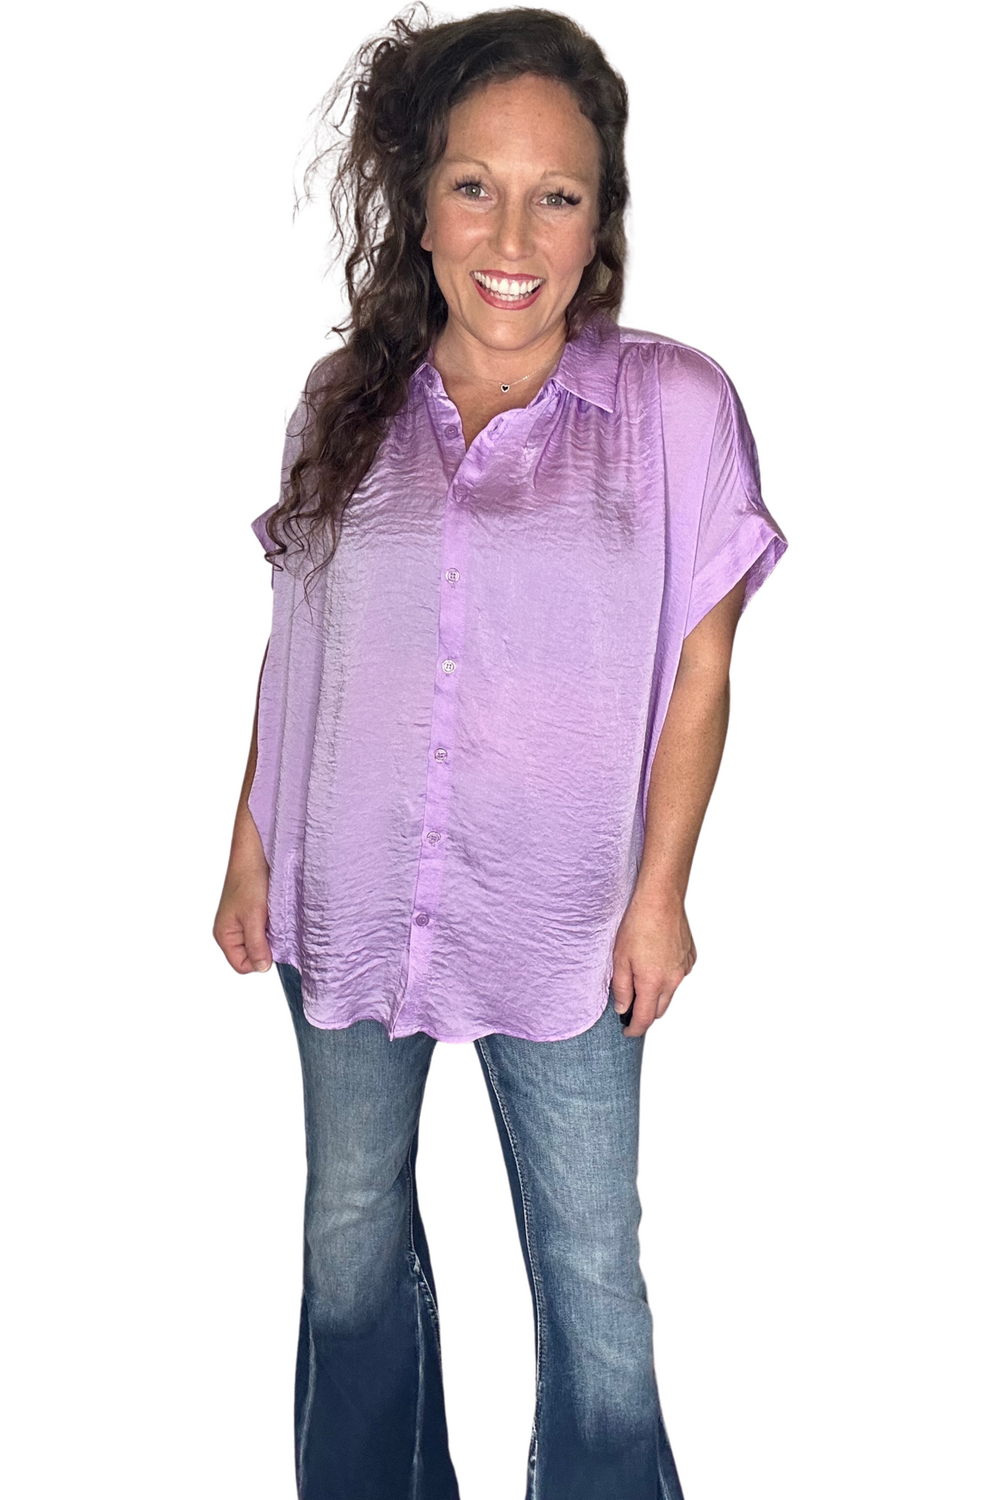 Jodifl Lavender Collared Button Up Top - Vintage Dragonfly Boutique